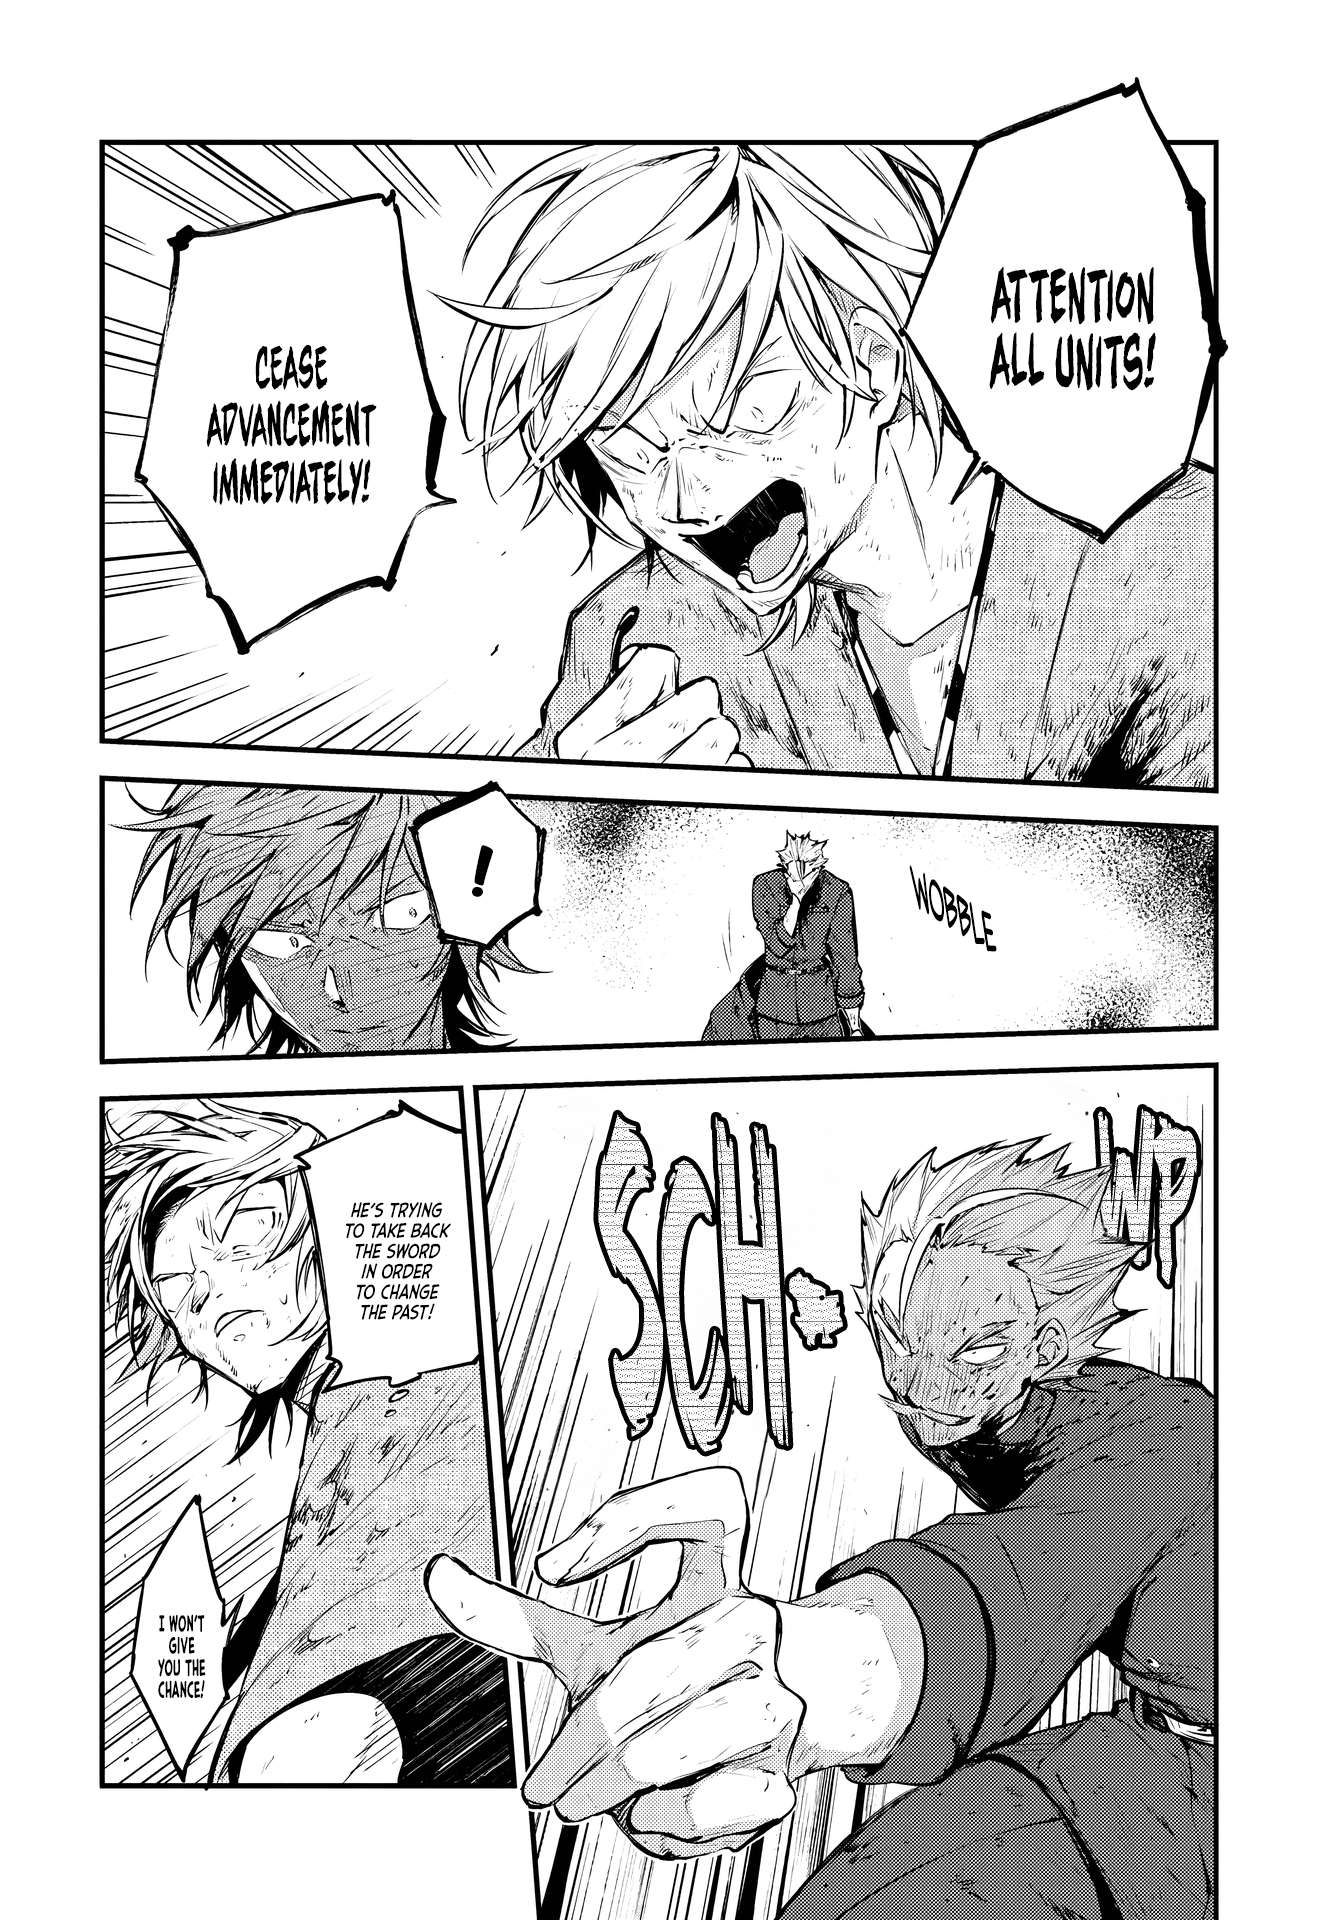 Bungo Stray Dogs chapter 111.5 page 13